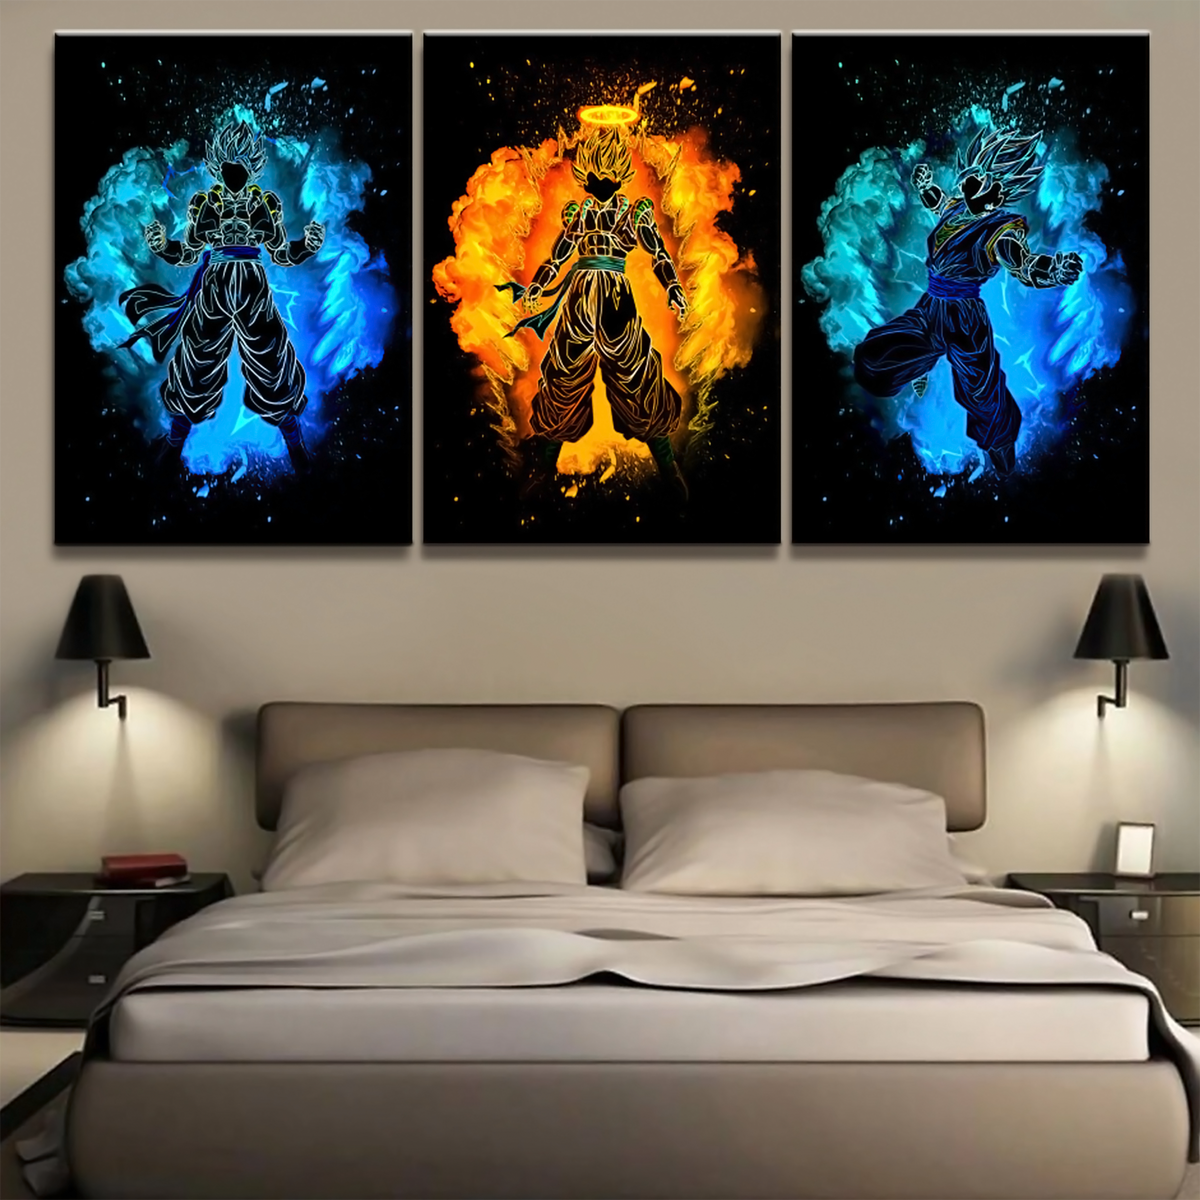 Dragon Ball - 3 Pieces Wall Art - Vegetto - Printed Wall Pictures Home Decor - Dragon Ball Poster - Dragon Ball Canvas